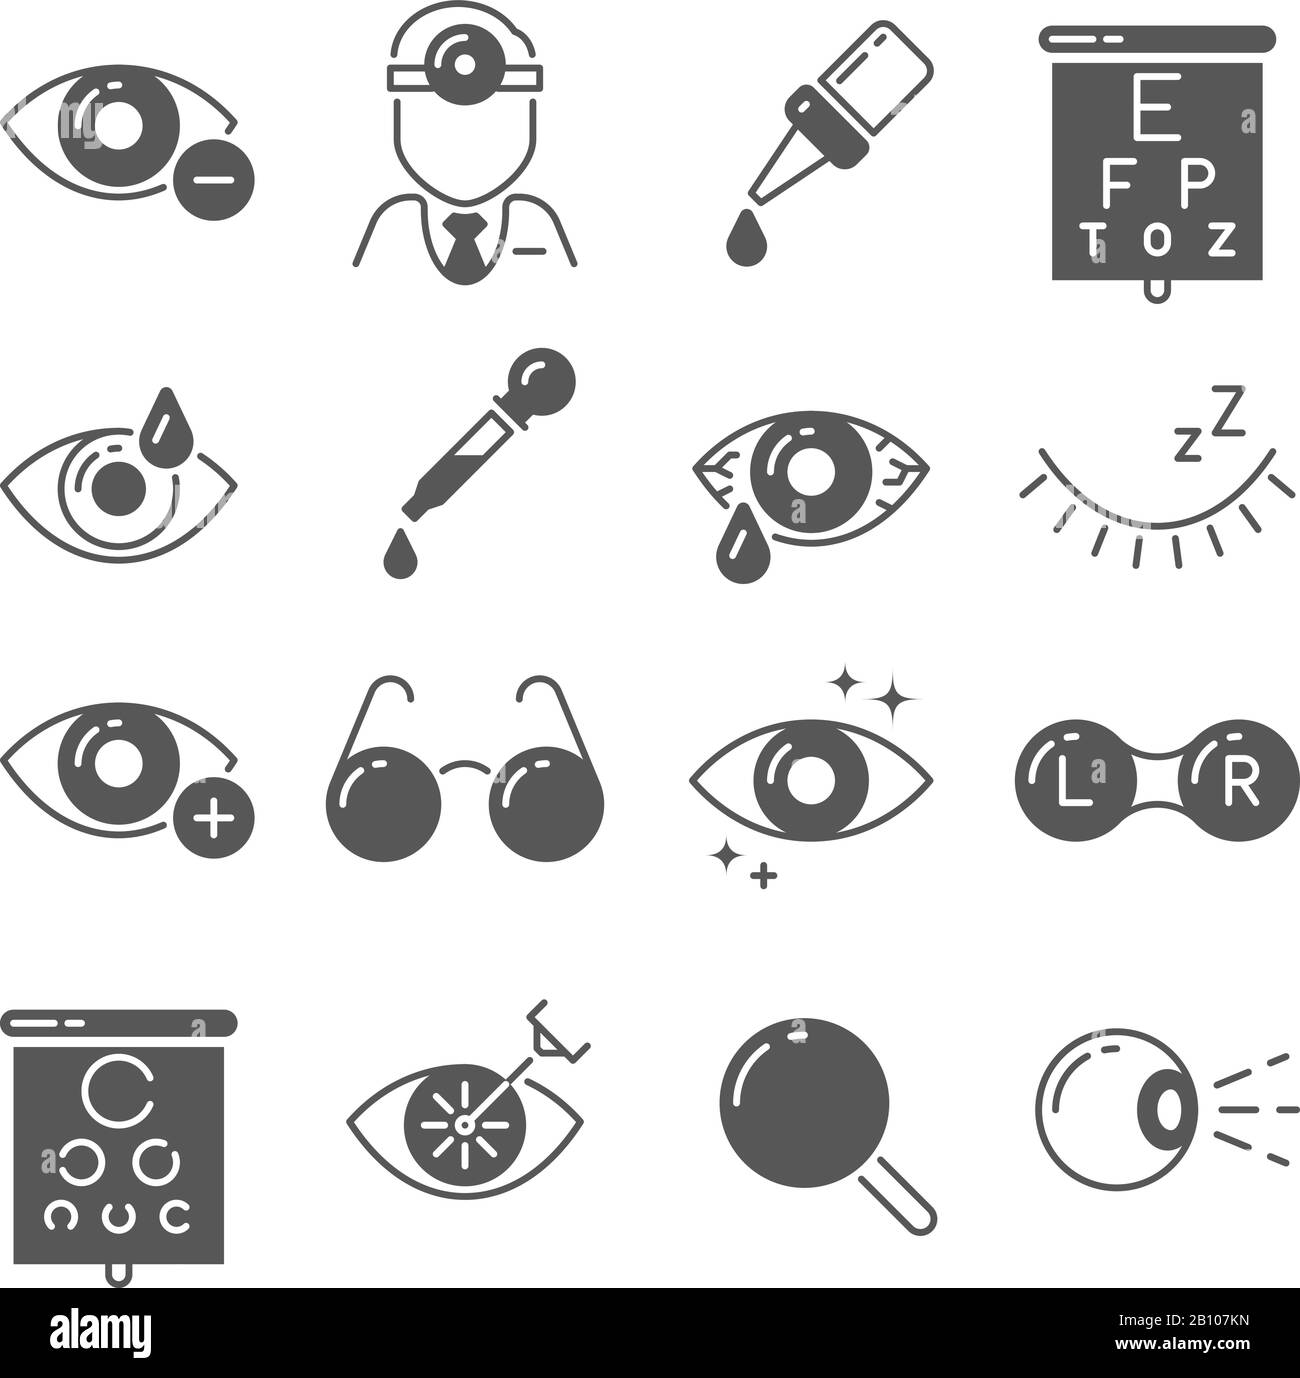 Optometry icons. Eye and glasses, vision and lens, laser surgery signs. Ophthalmology vector symbols Stock Vector